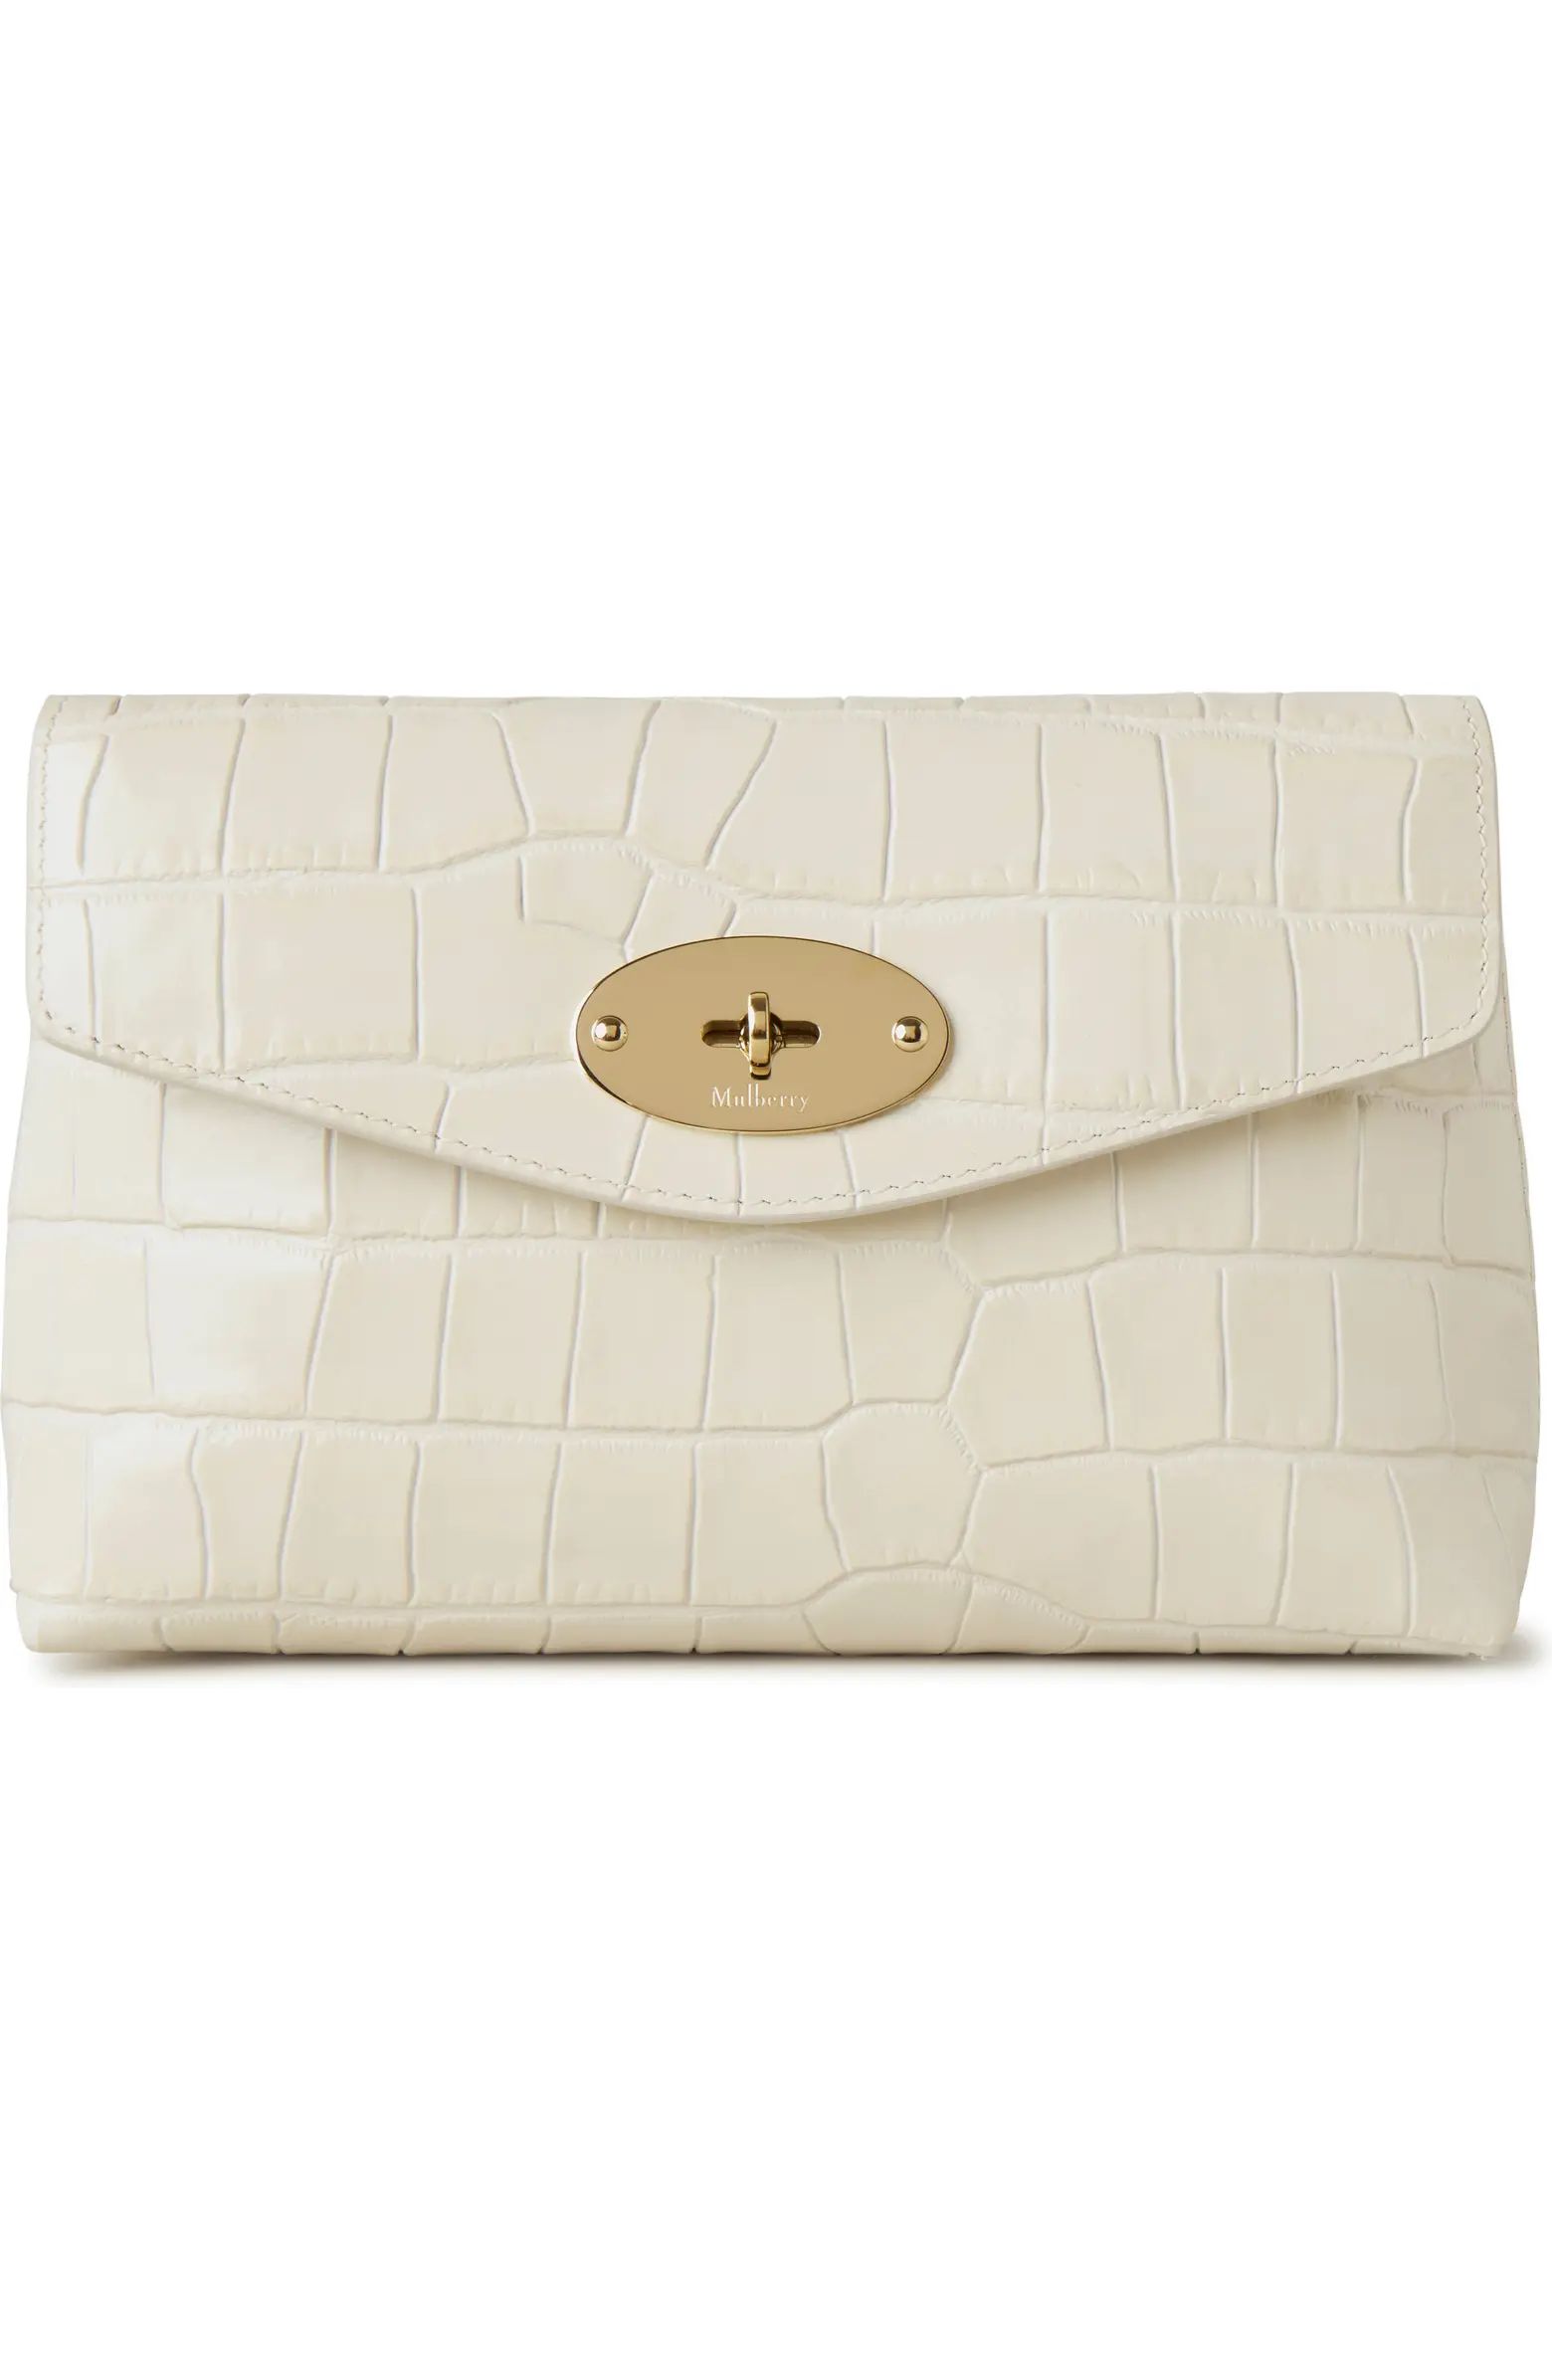 Mulberry Darley Shiny Croc Embossed Leather Cosmetics Pouch | Nordstrom | Nordstrom